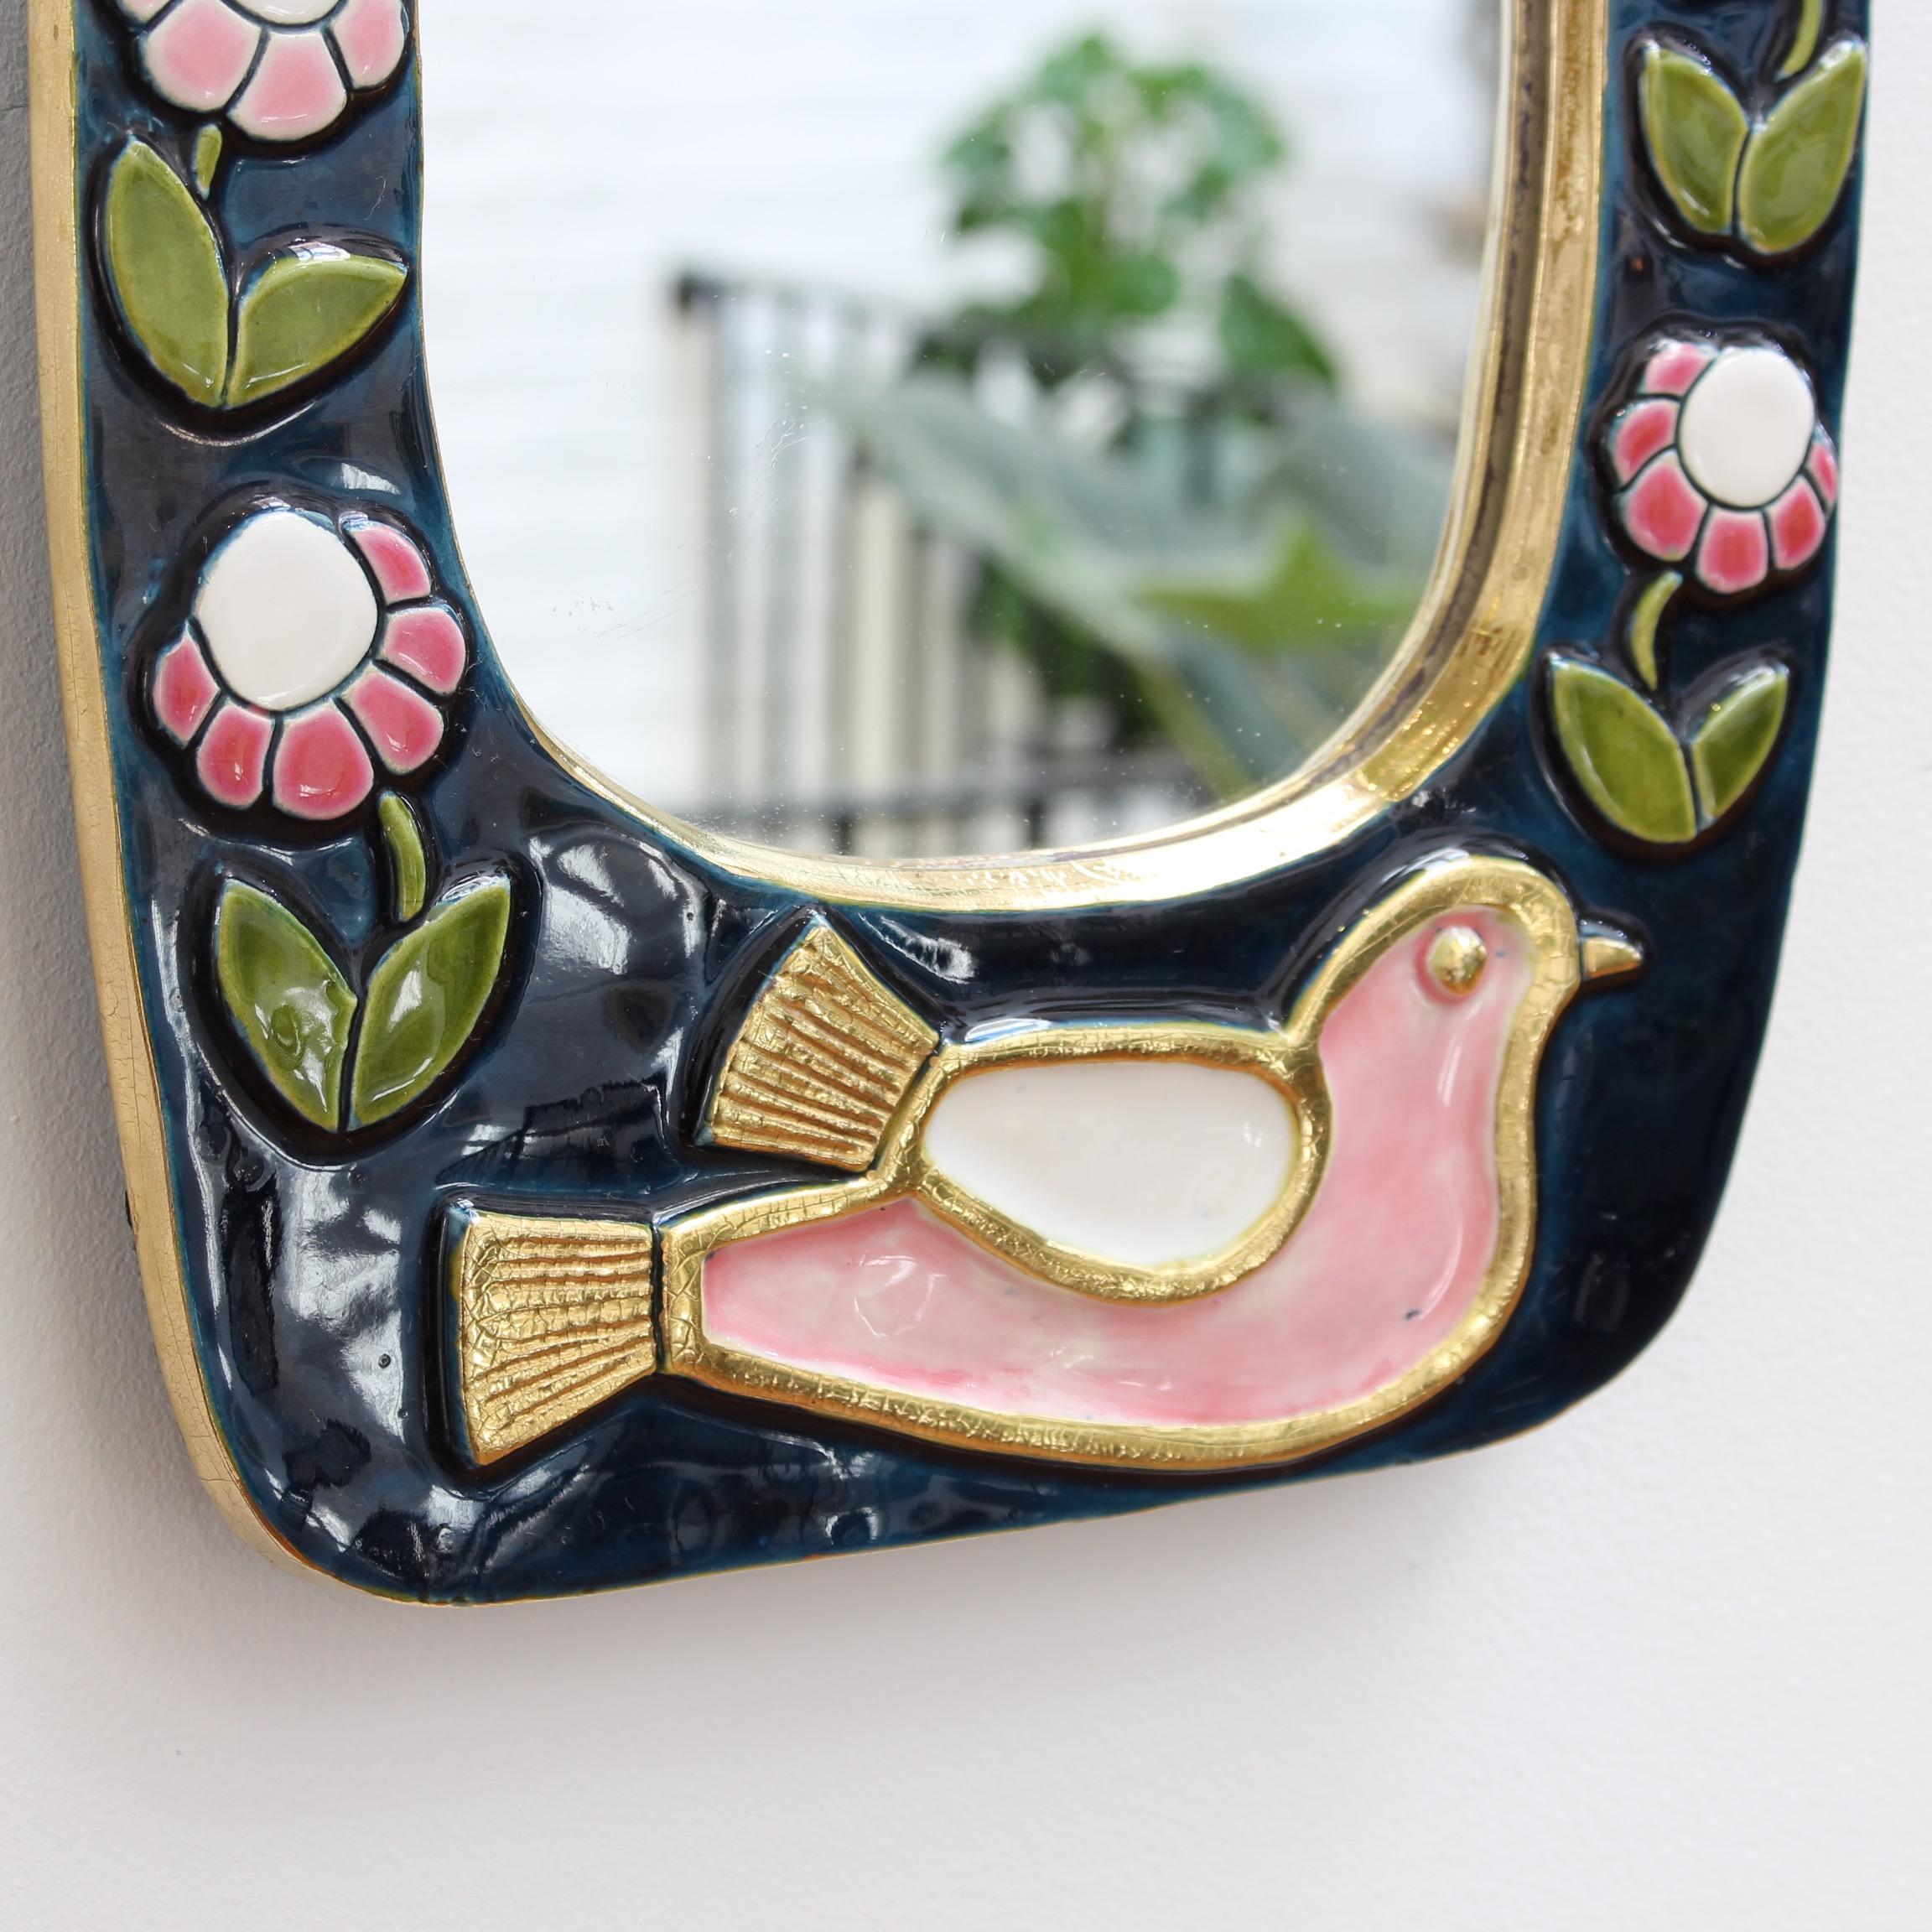 Late 20th Century Ceramic Wall Mirror with Flower Motif and Stylised Bird by François Lembo, 1970s